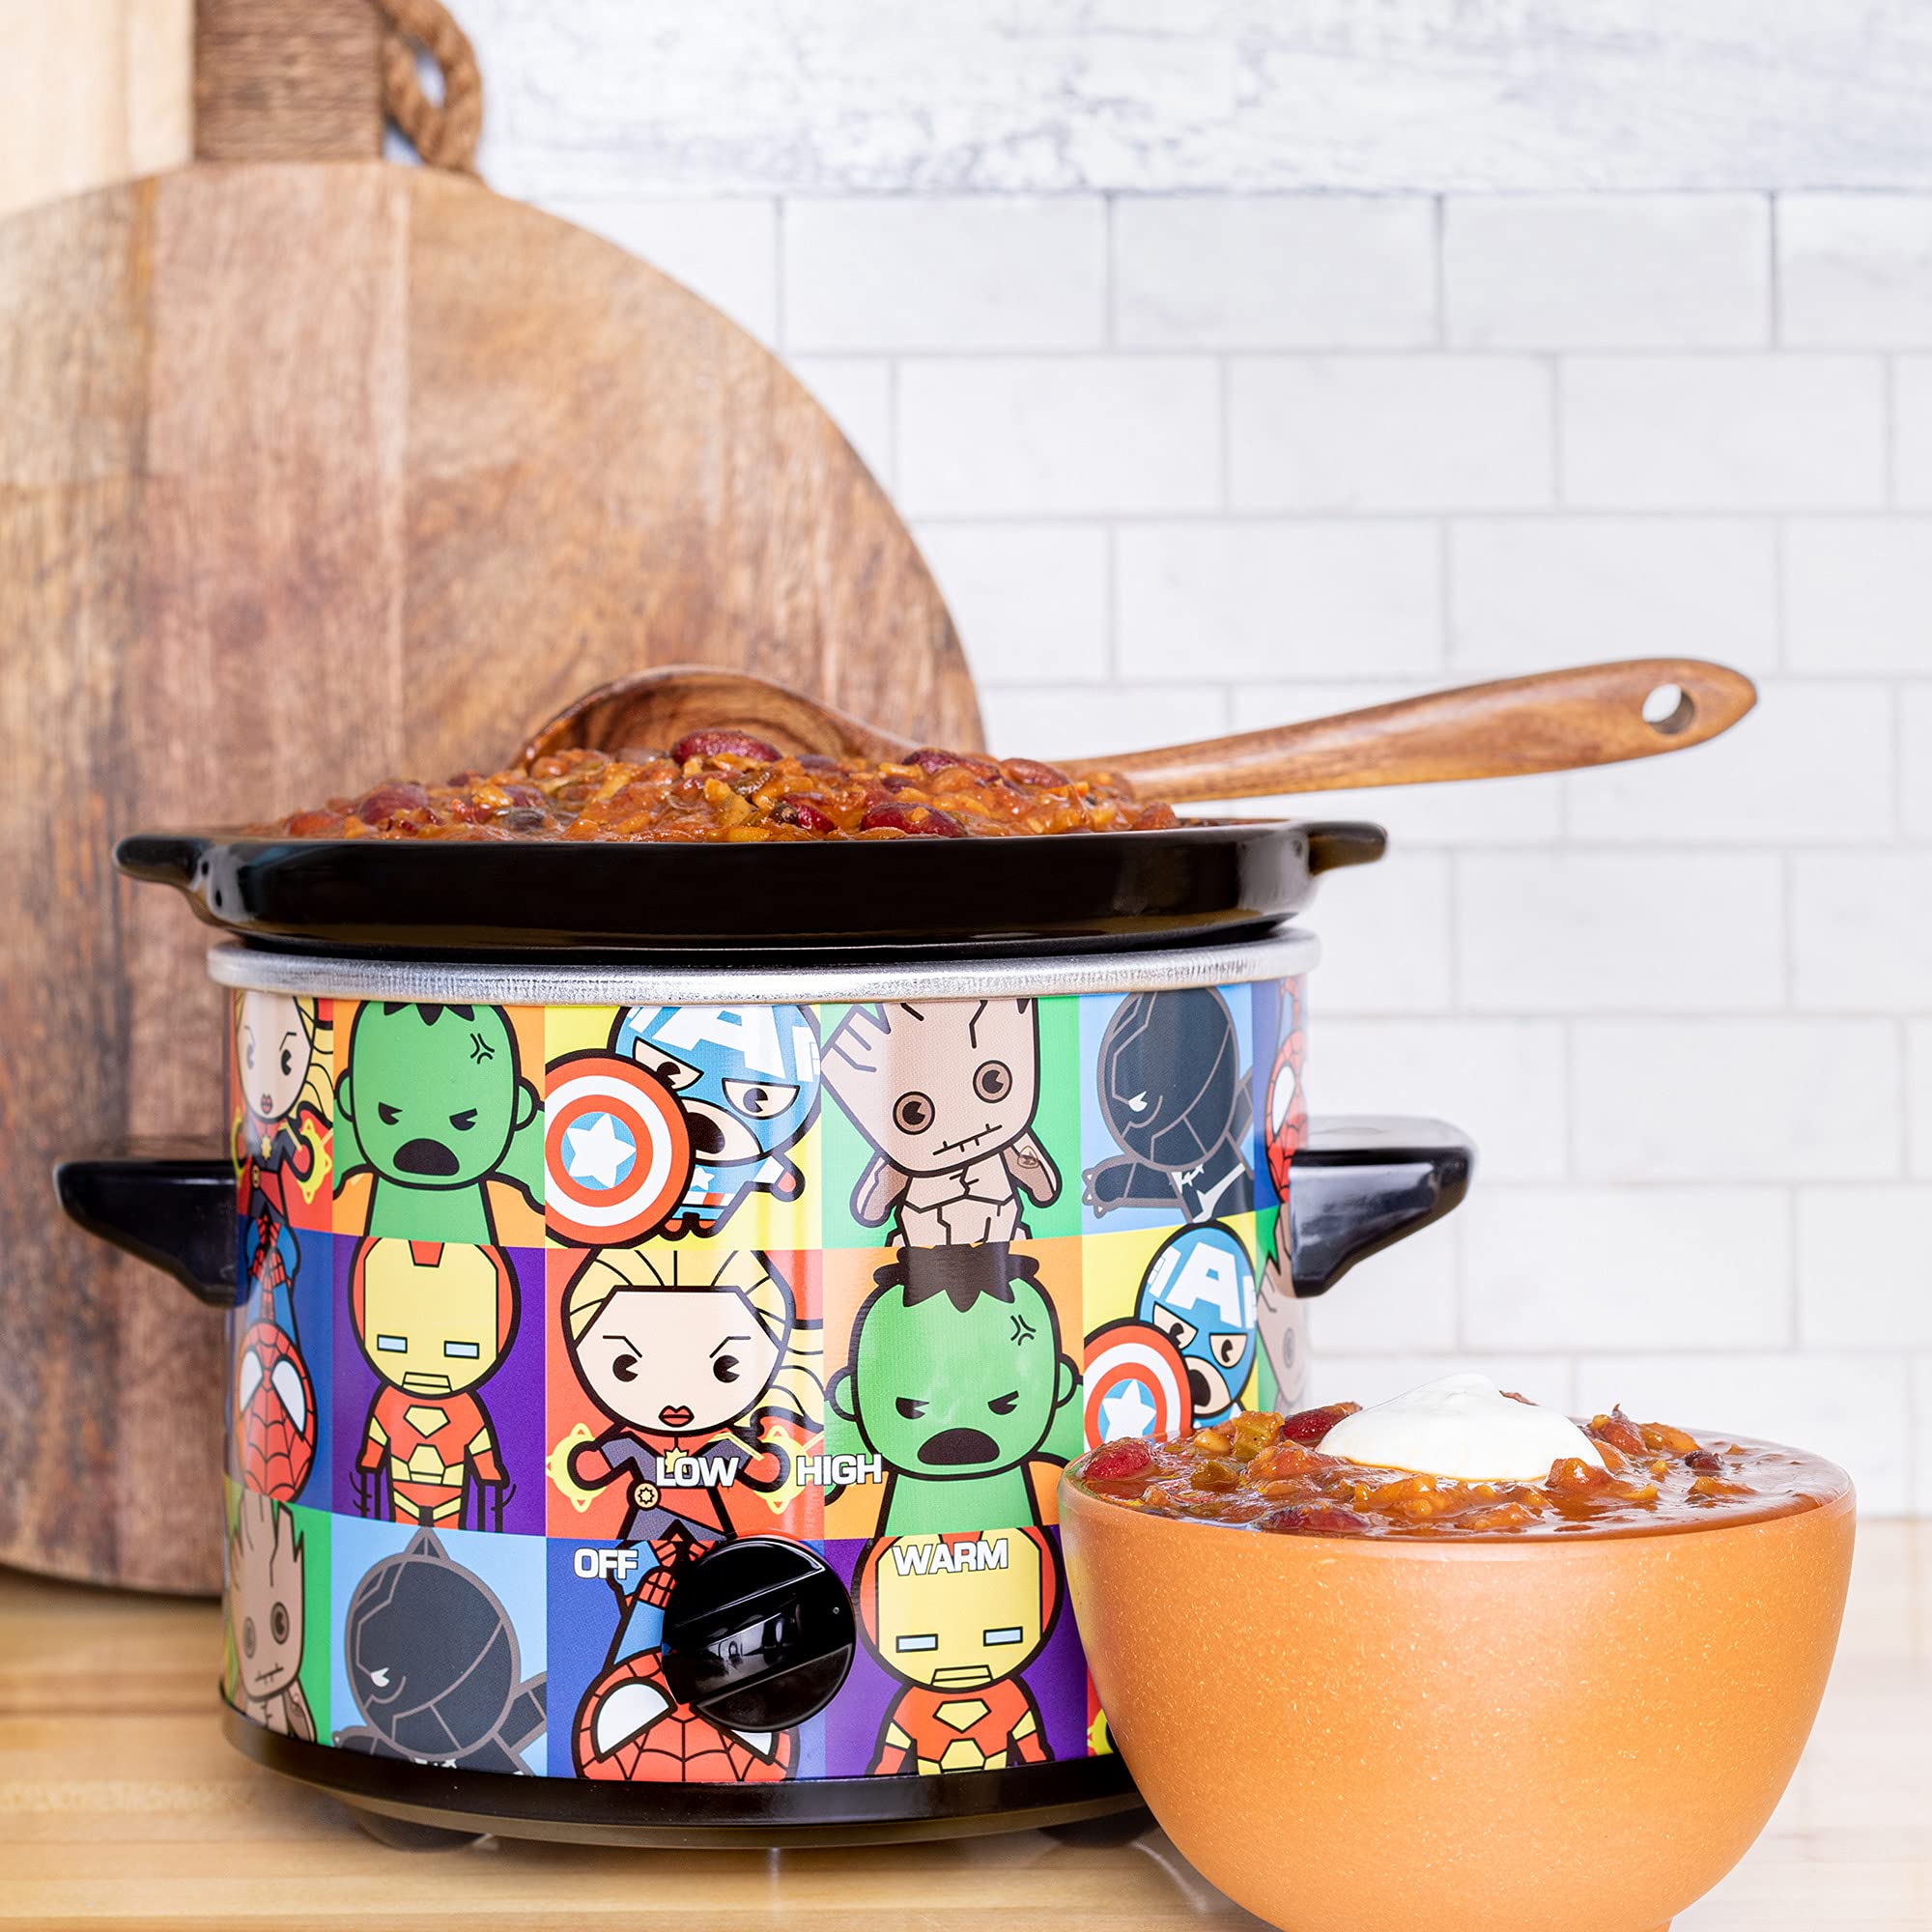 Uncanny Brands Marvel Avengers Kawaii 2qt Slow Cooker- Cook With Your Favorite Avengers